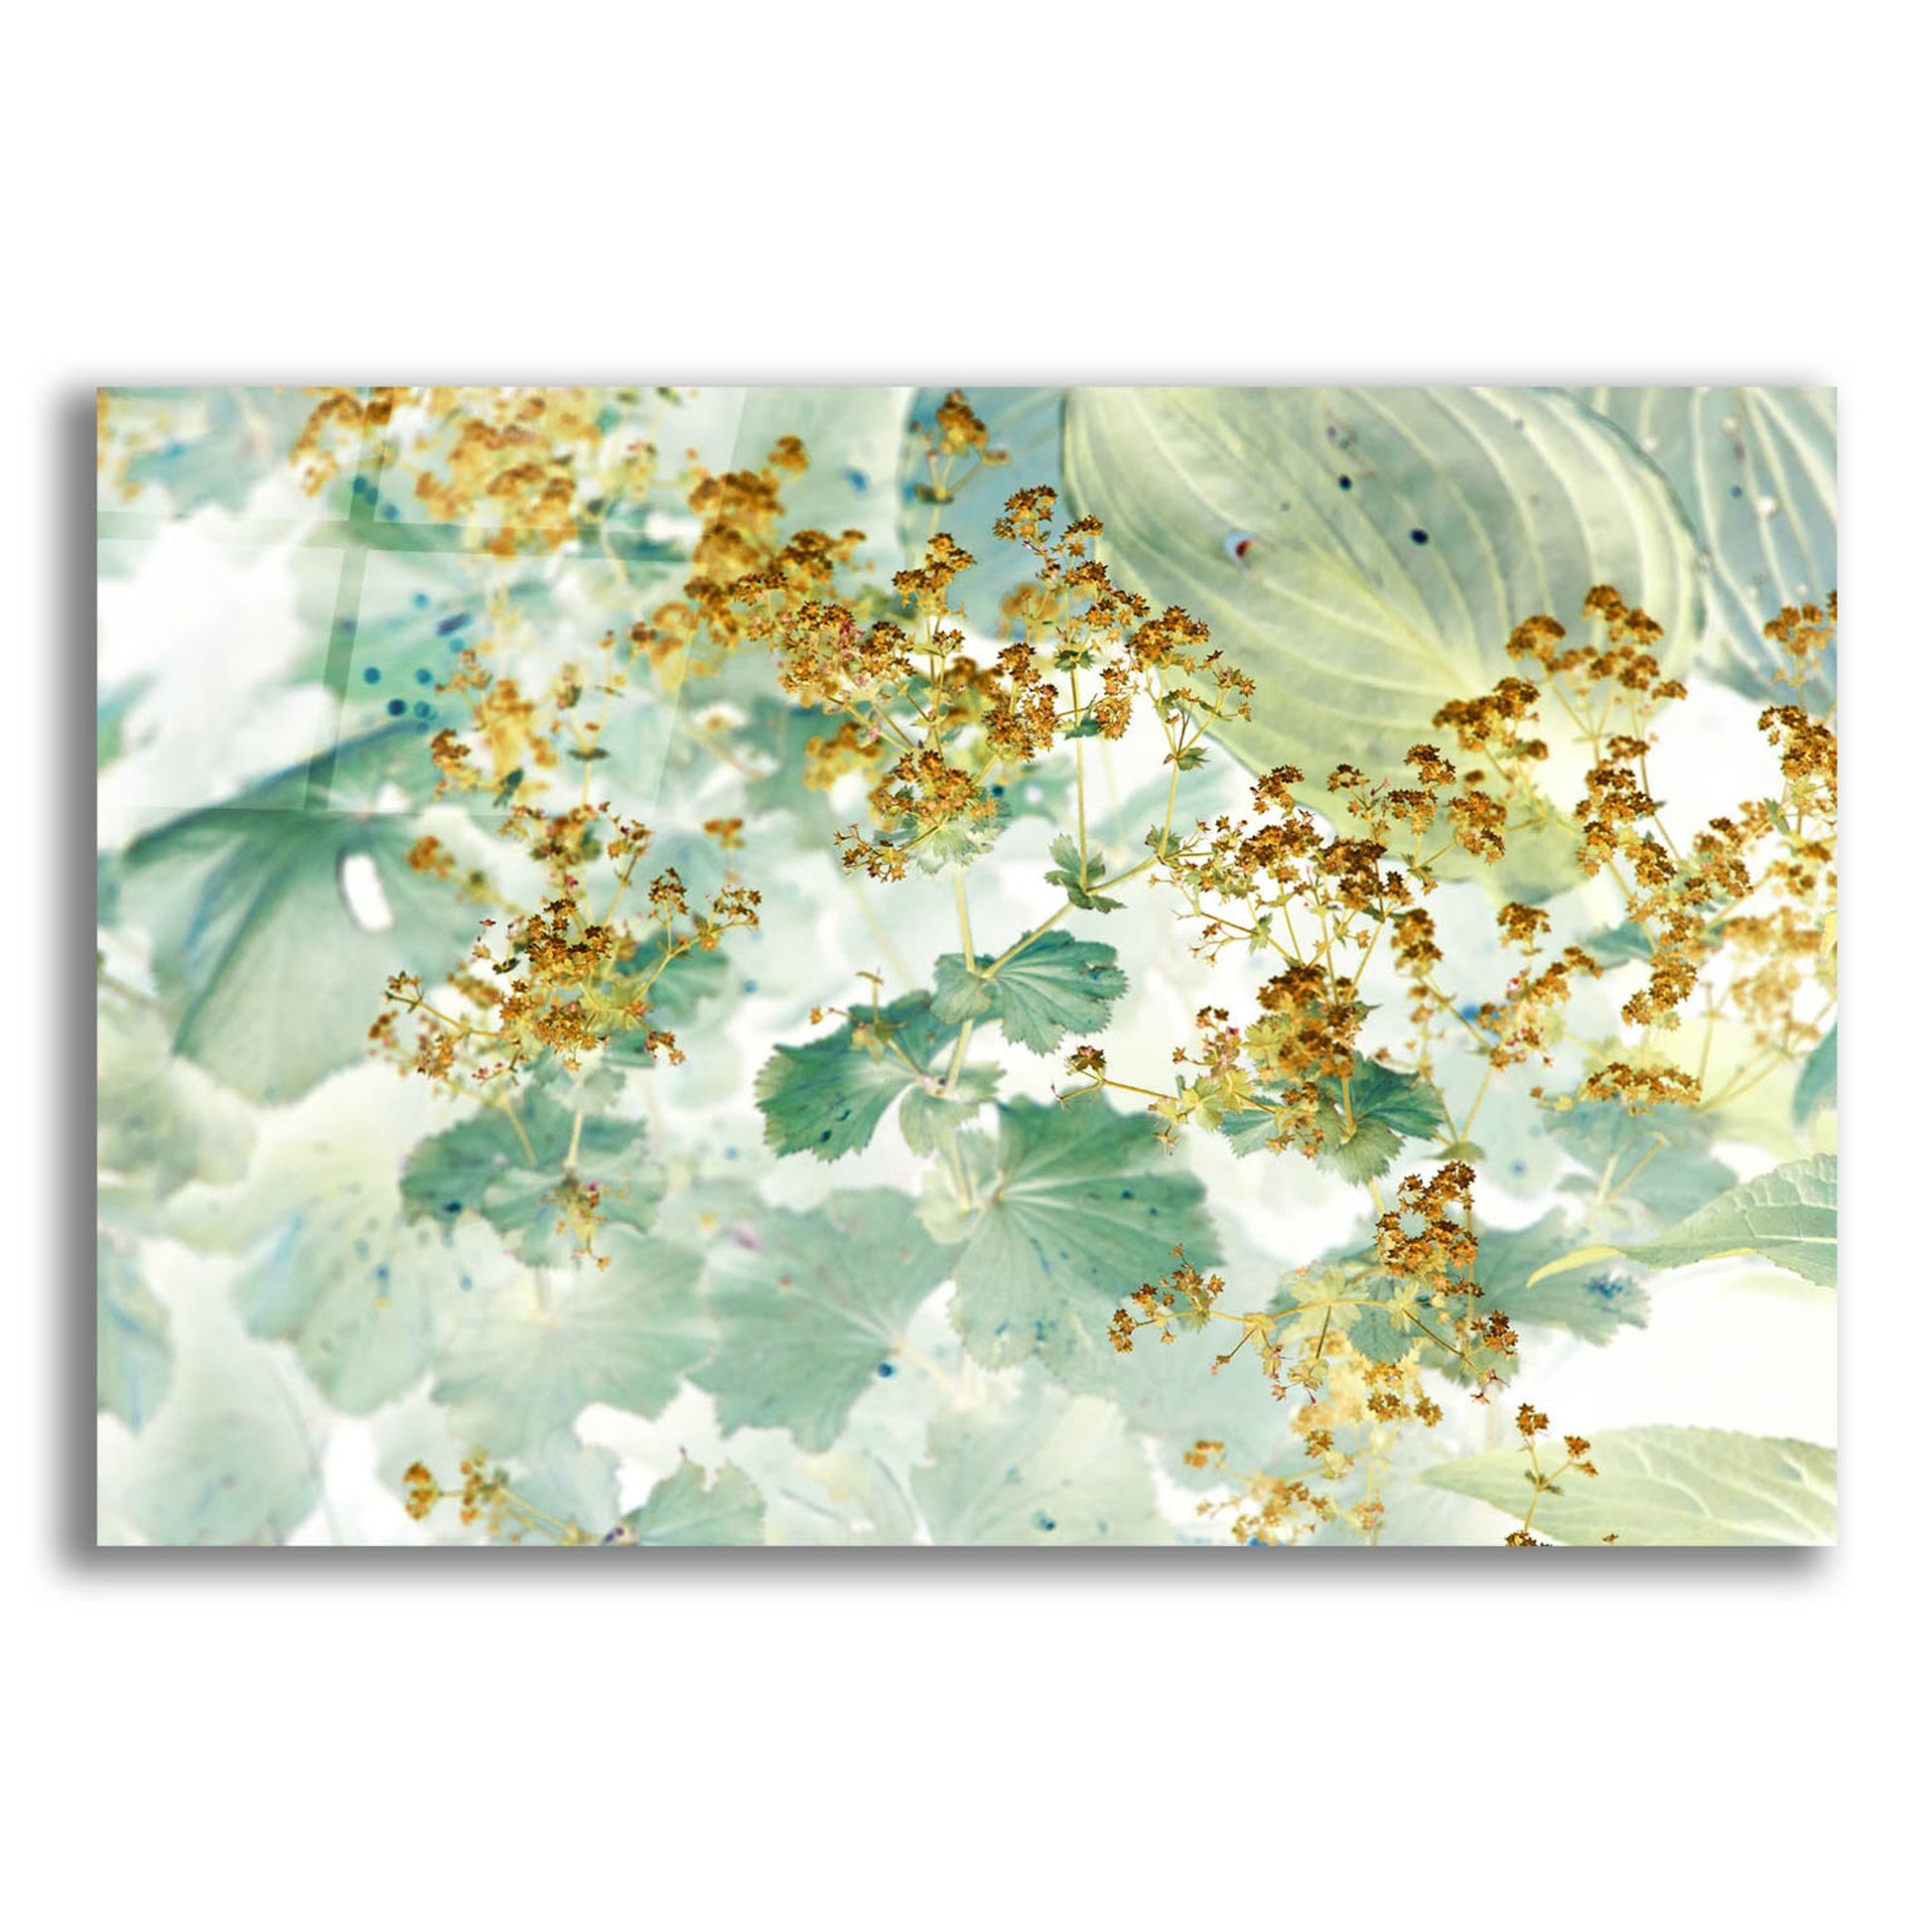 Epic Art ' Golden Lady's Mantle' by Judy Stalus, Acrylic Glass Wall Art,24x16